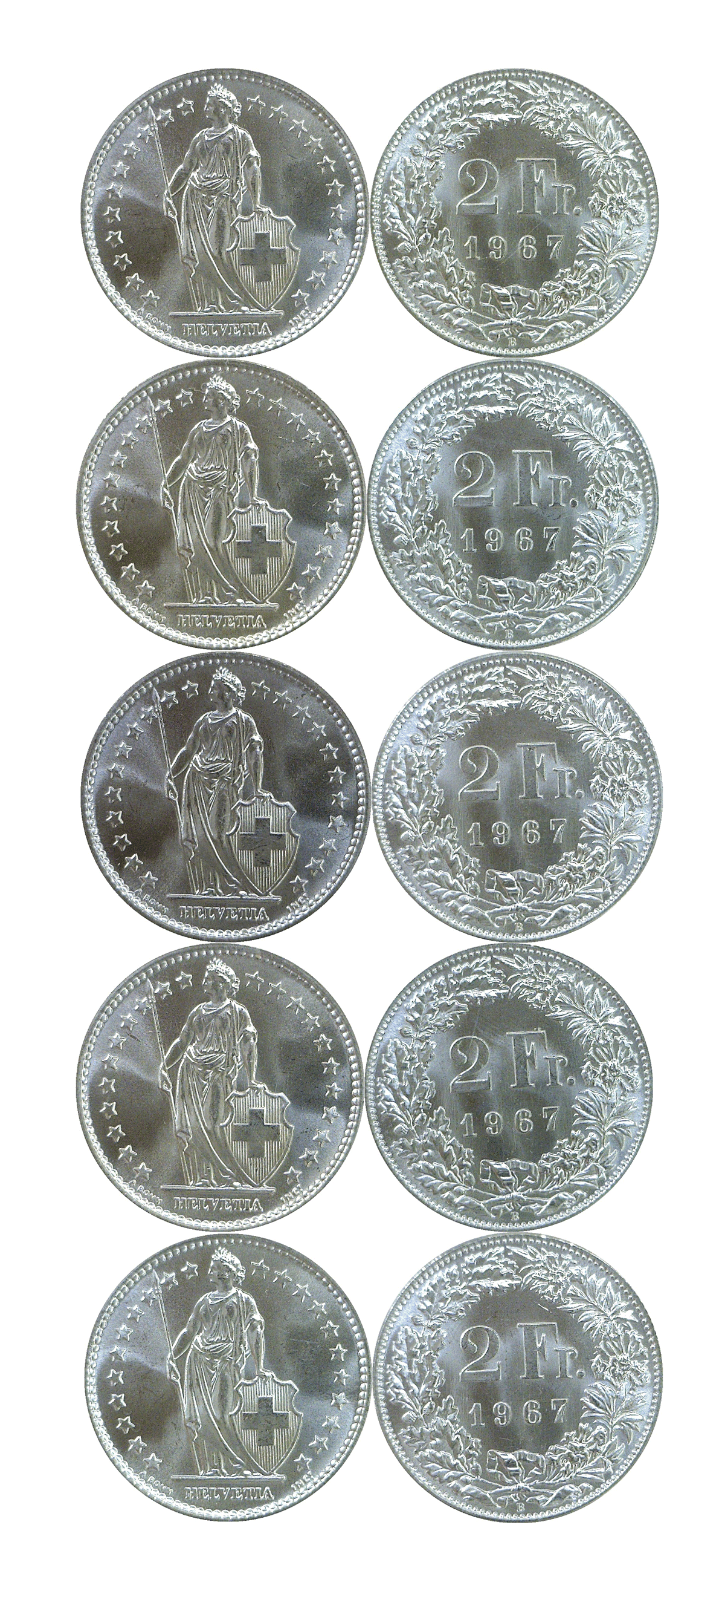 1967 B Switzerland 2 Francs Silver 5 Coin Lot KM# 21 Uncirculated Без бренда